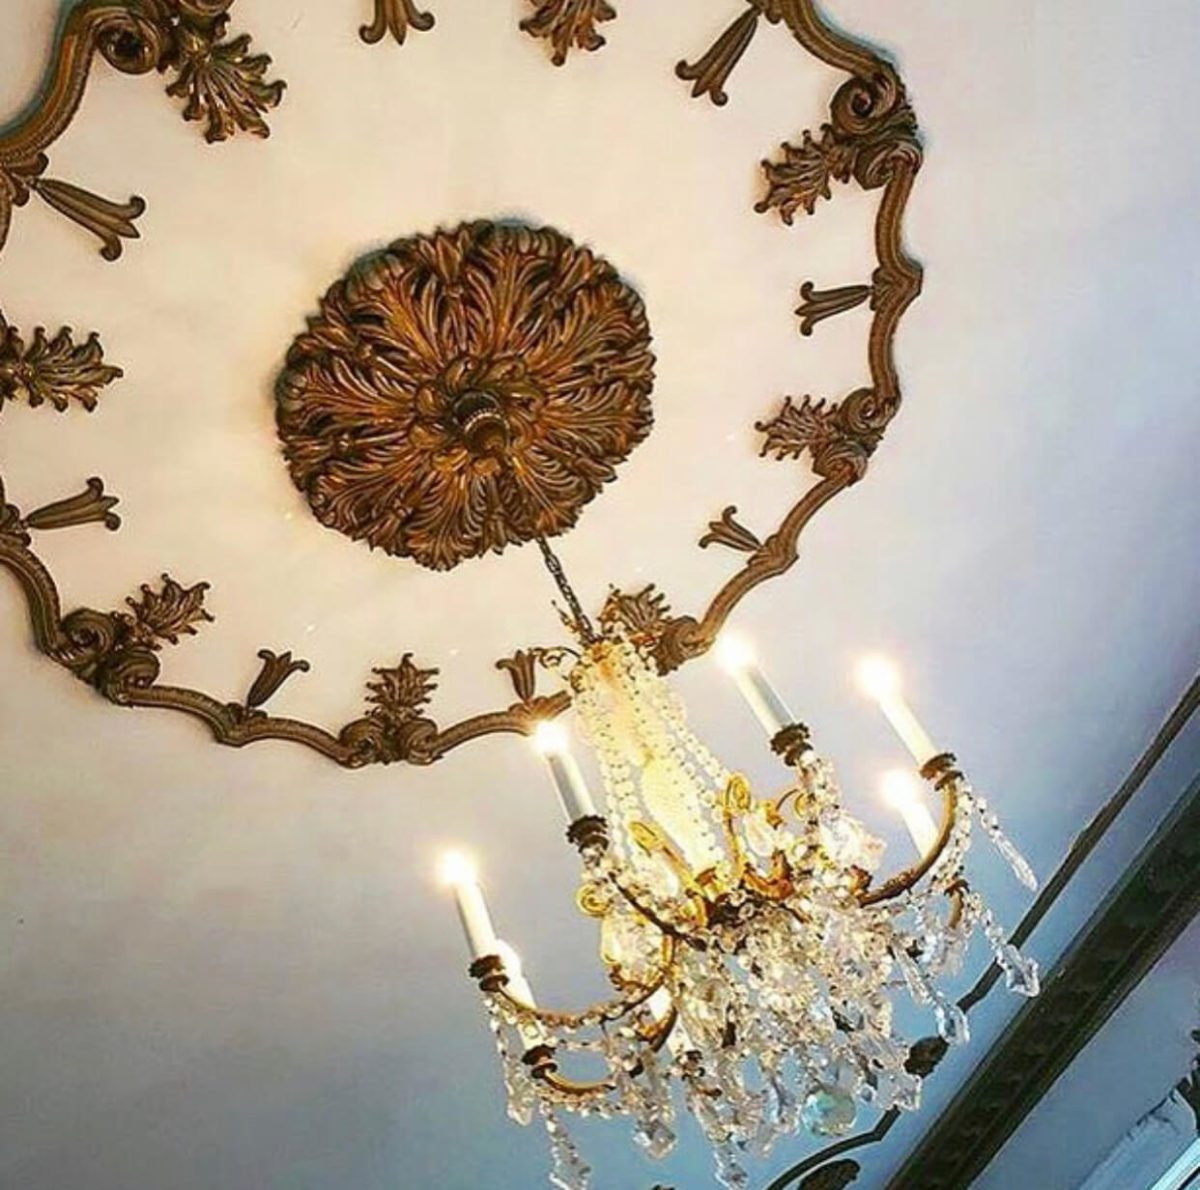 Bronze chandelier hanging from the ceiling